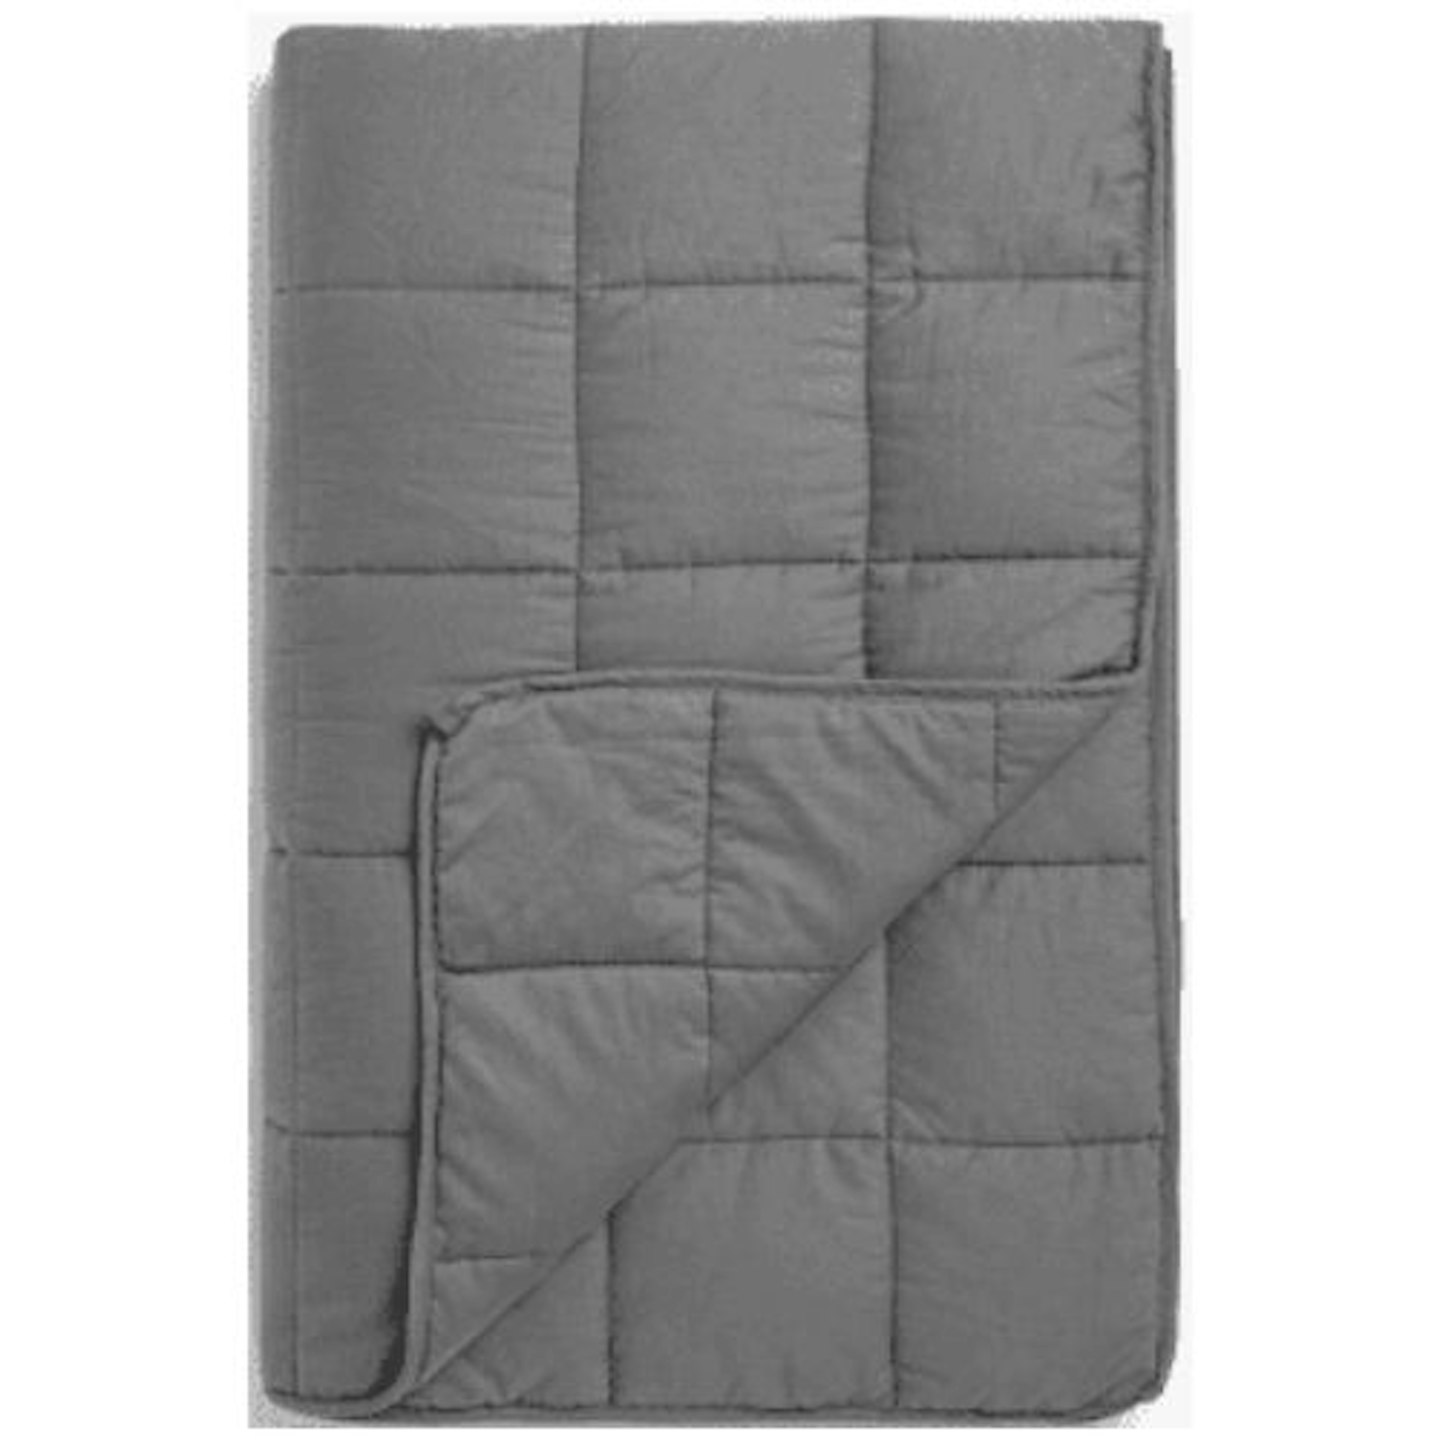 https://www.johnlewis.com/john-lewis-partners-specialist-synthetic-weighted-blanket/p4117499?size=11.5kg